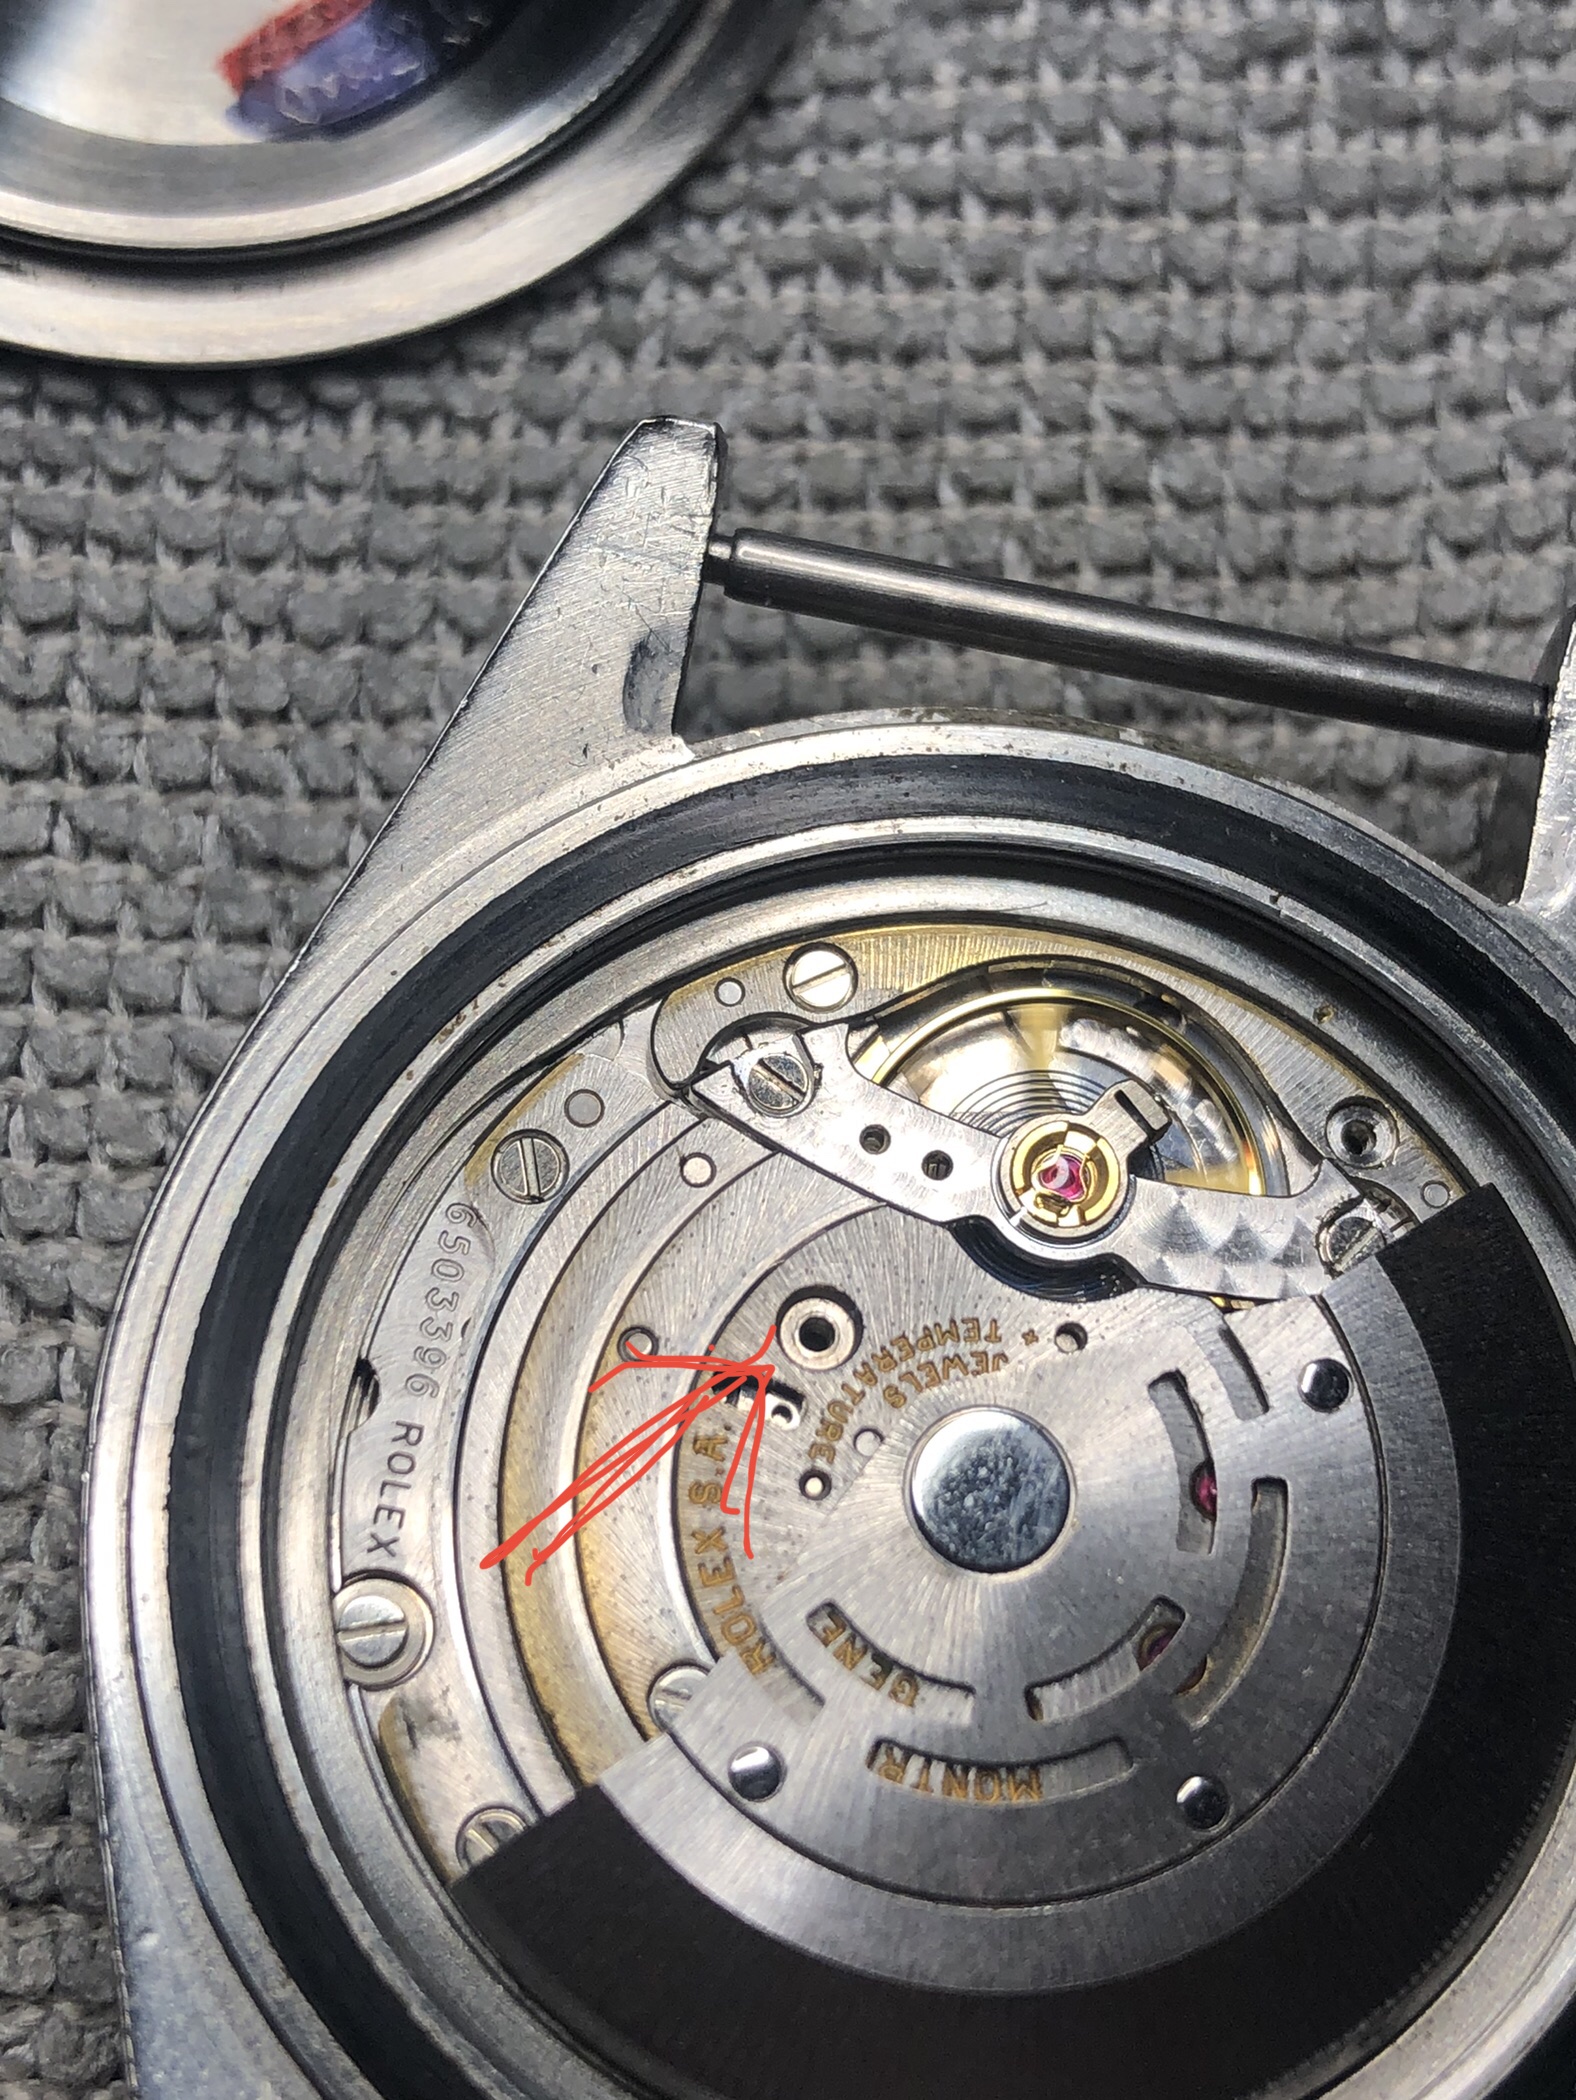 What are the watch parts name?